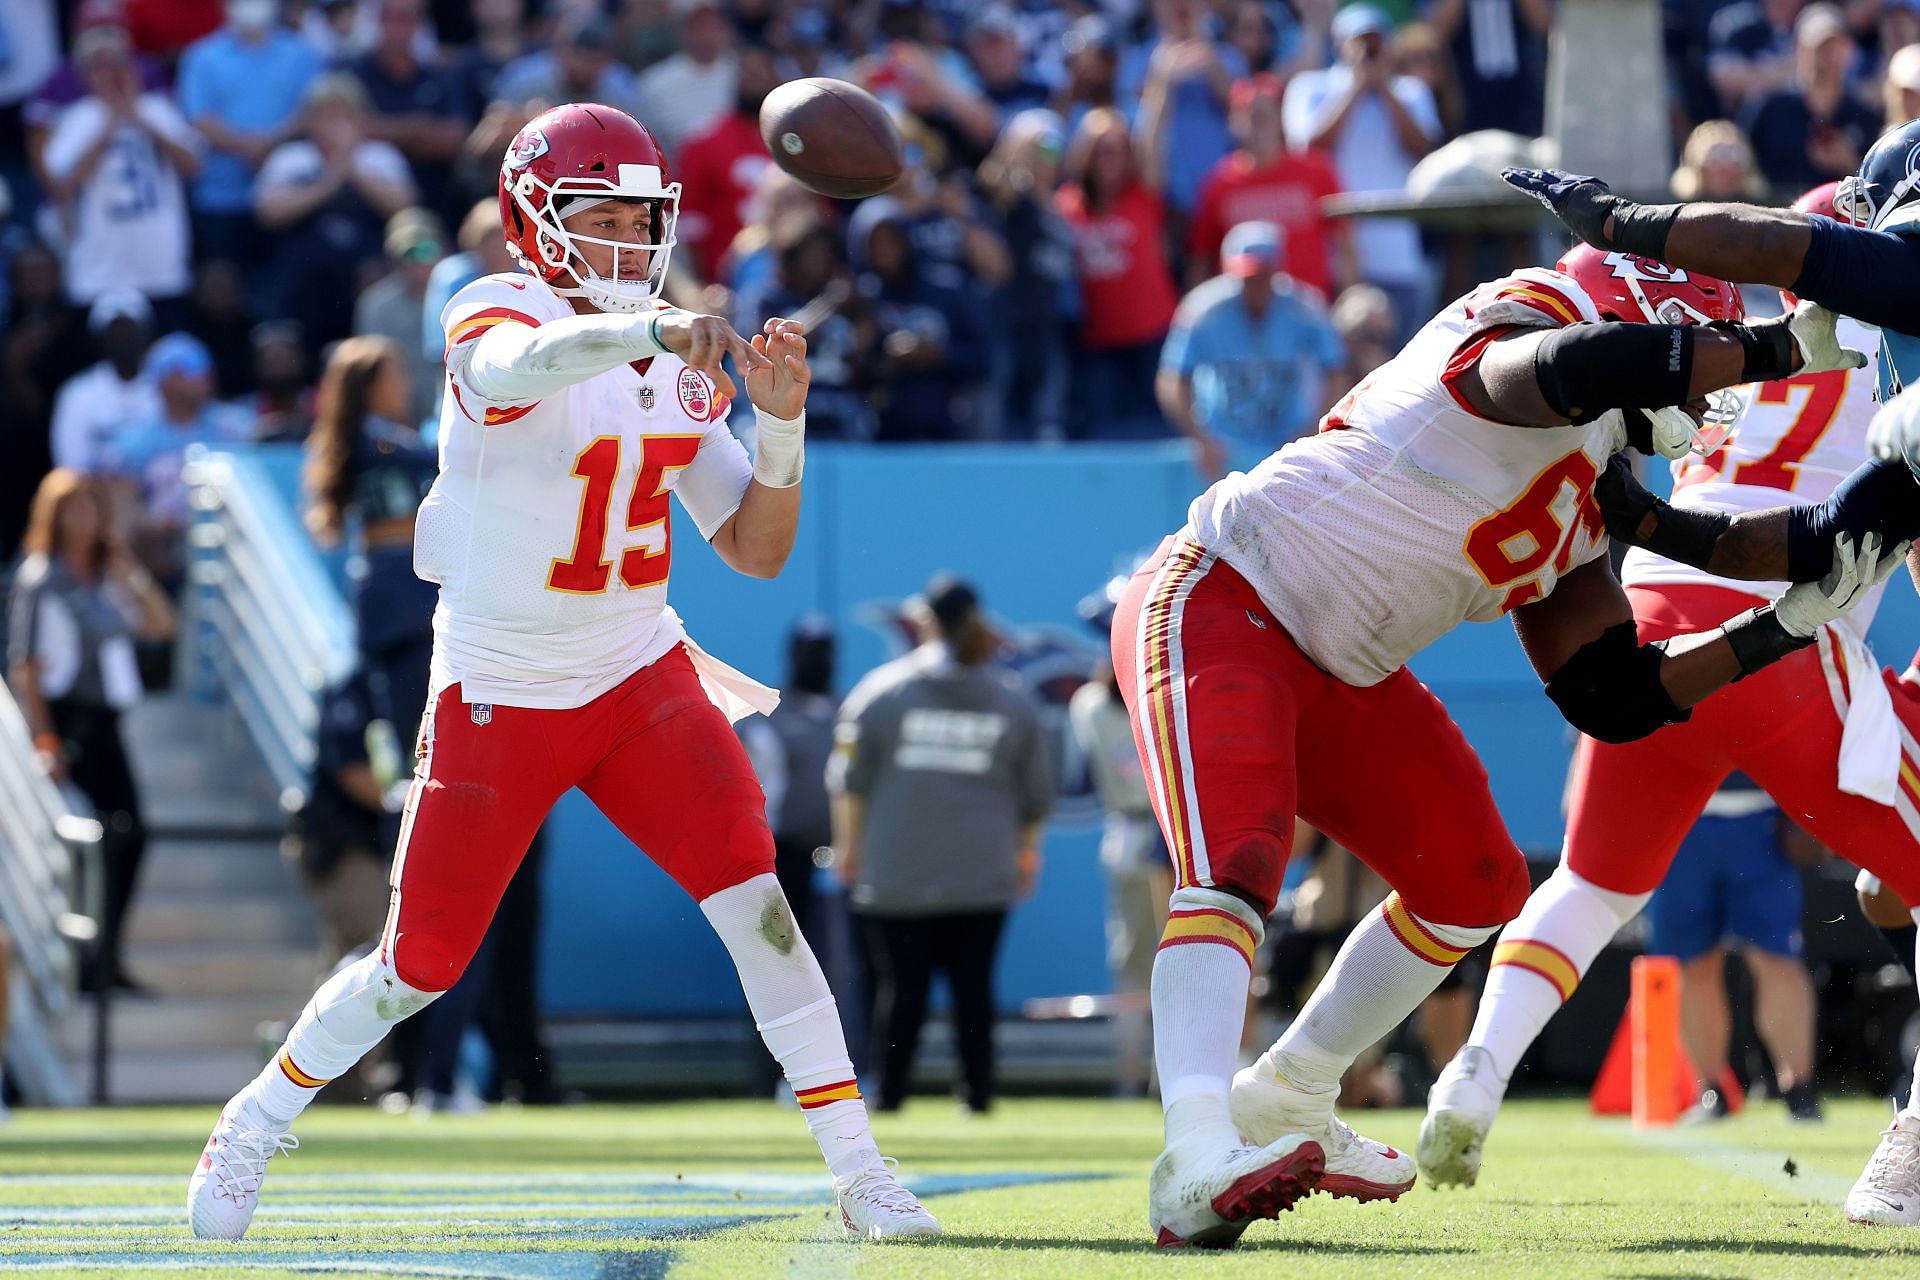 Giants vs Chiefs live stream is tonight: How to watch Monday Night